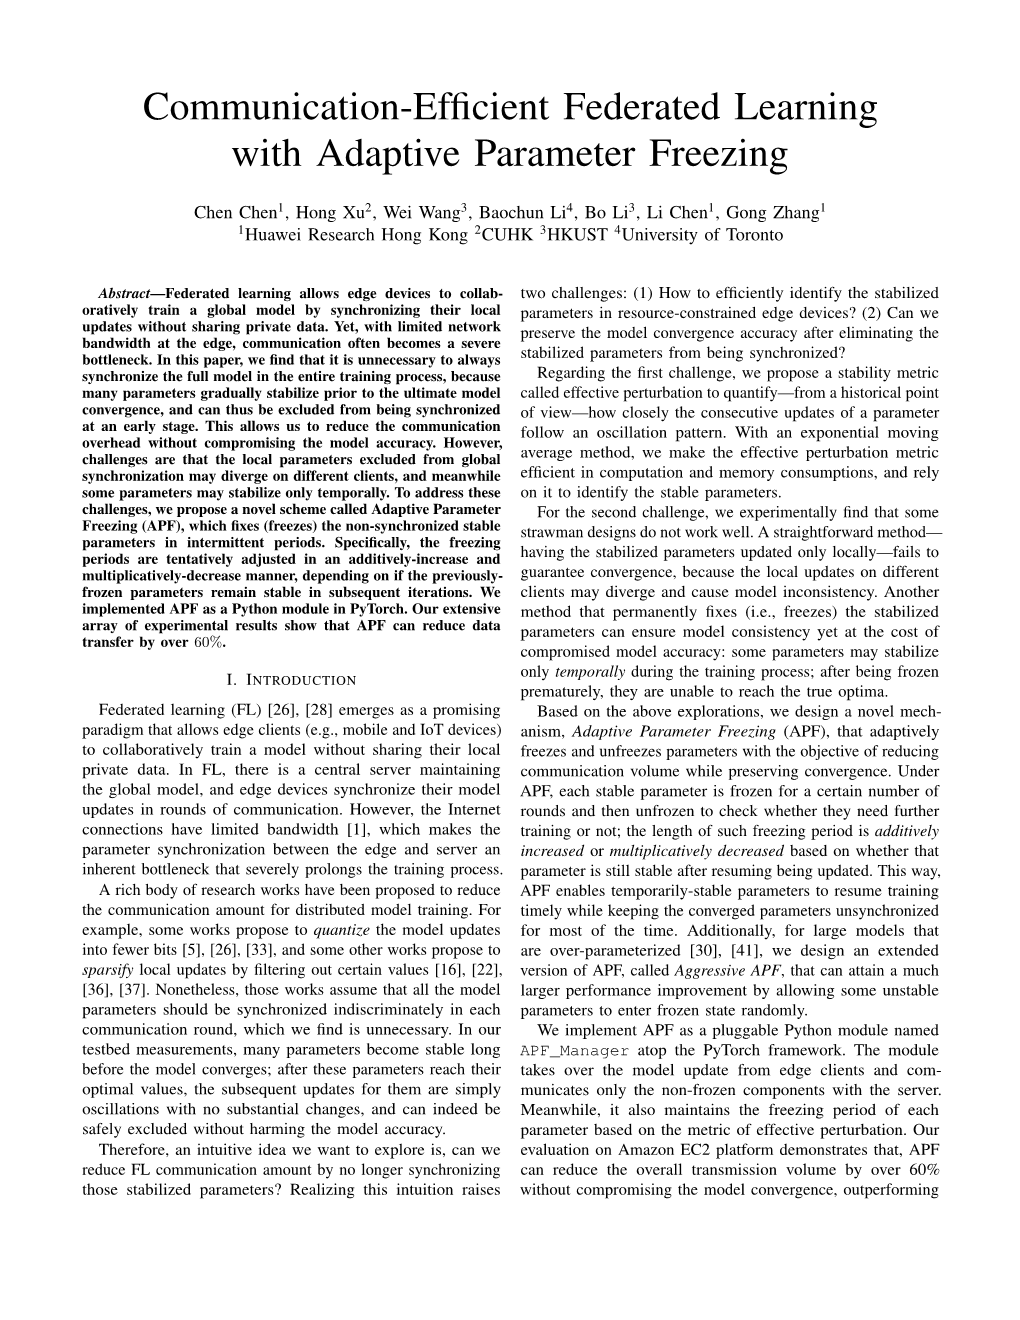 Communication-Efficient Federated Learning with Adaptive Parameter